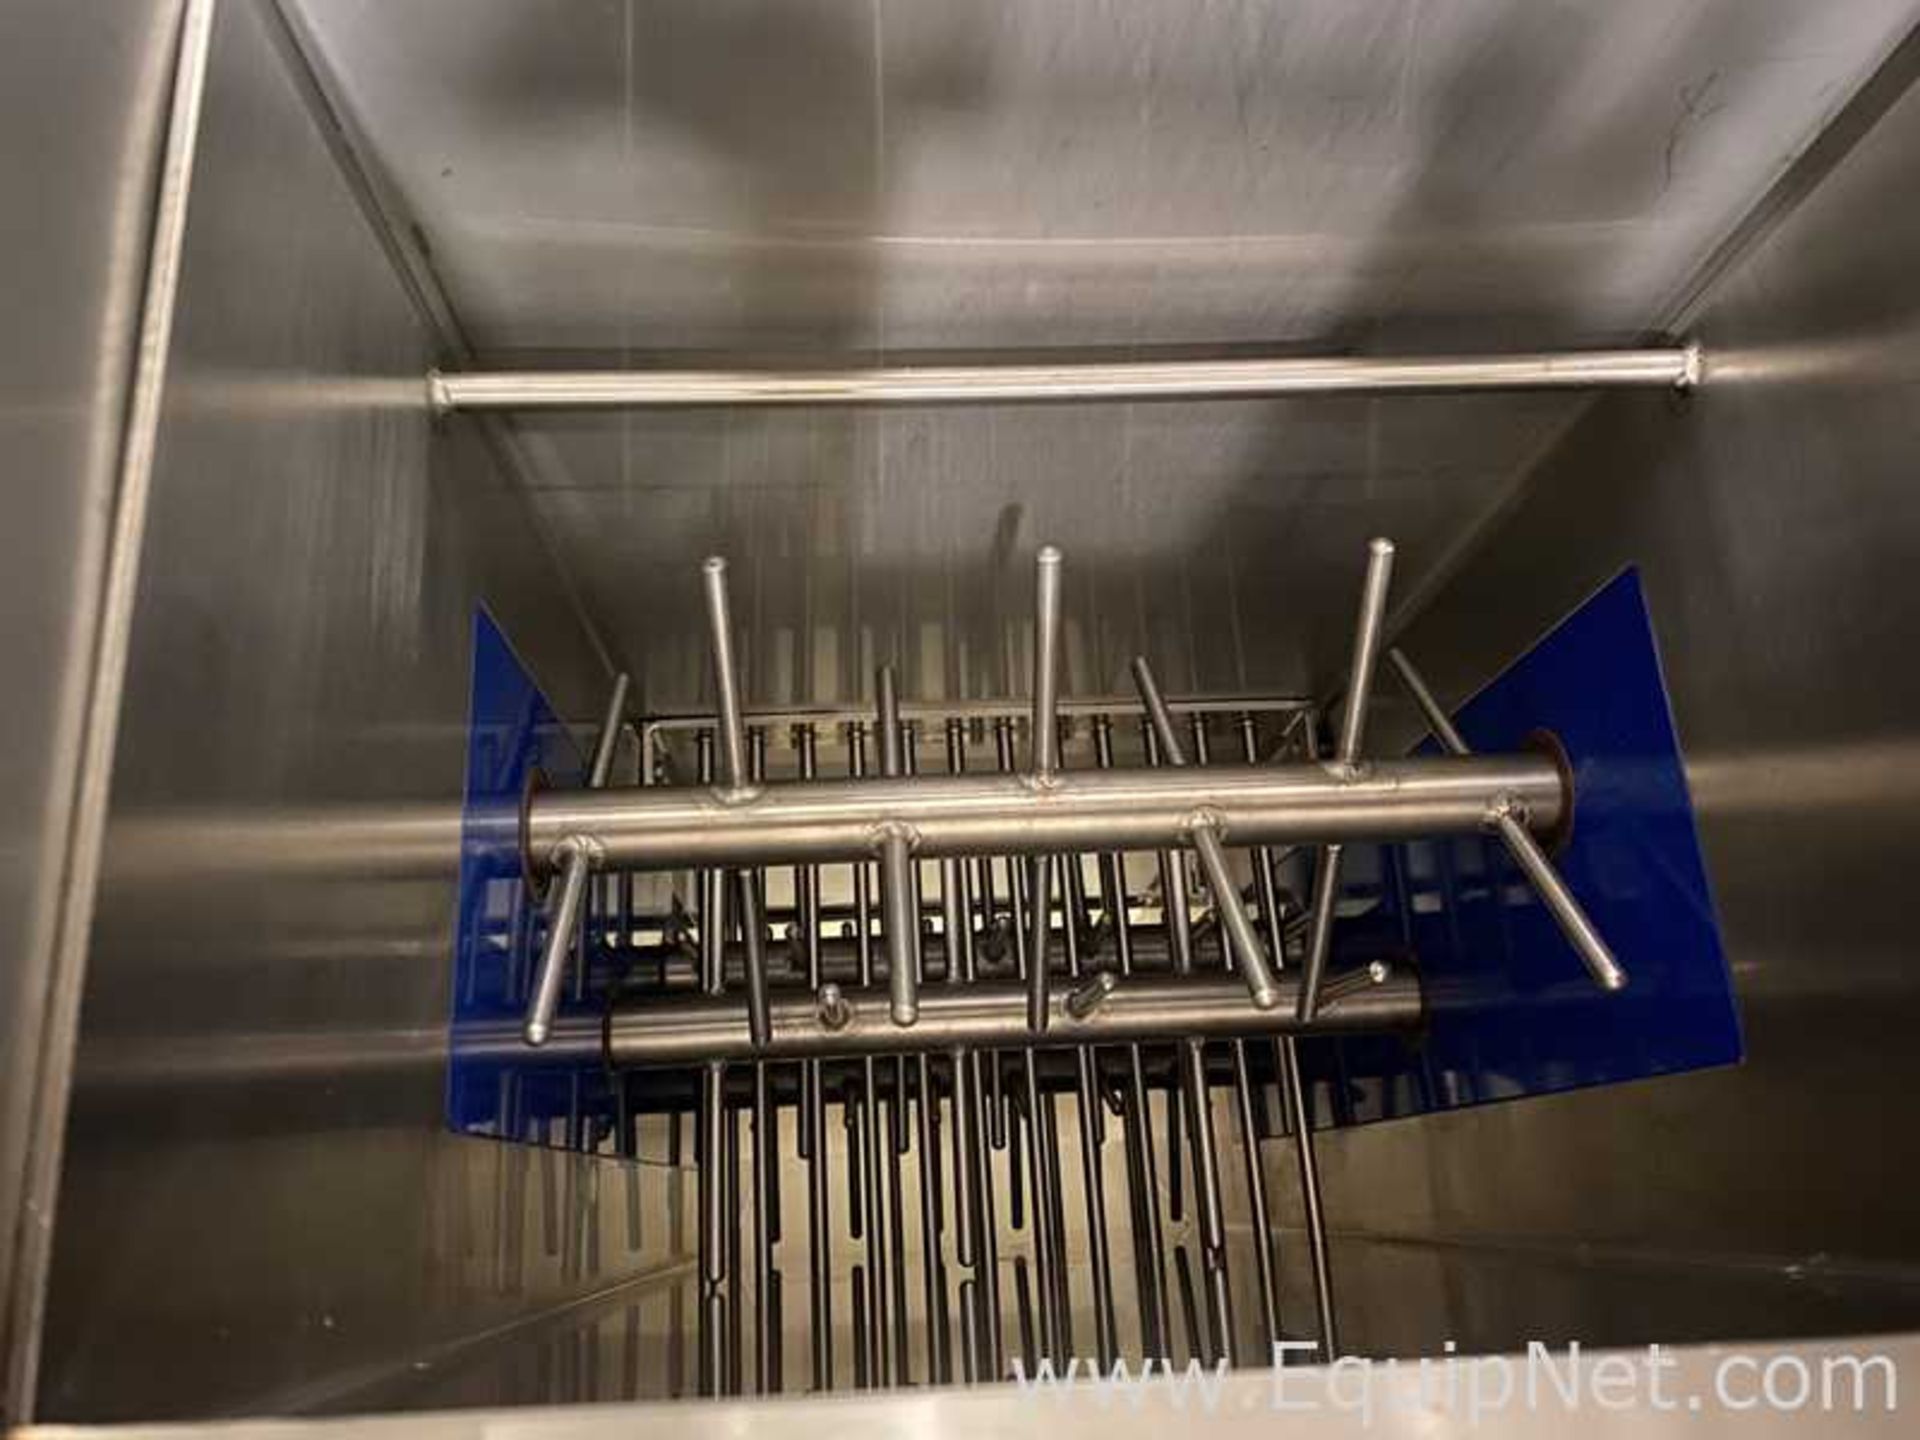 CM Machine Services Meat Shredding Machine With Flighted Incline Conveyor for Shredder - Image 8 of 15